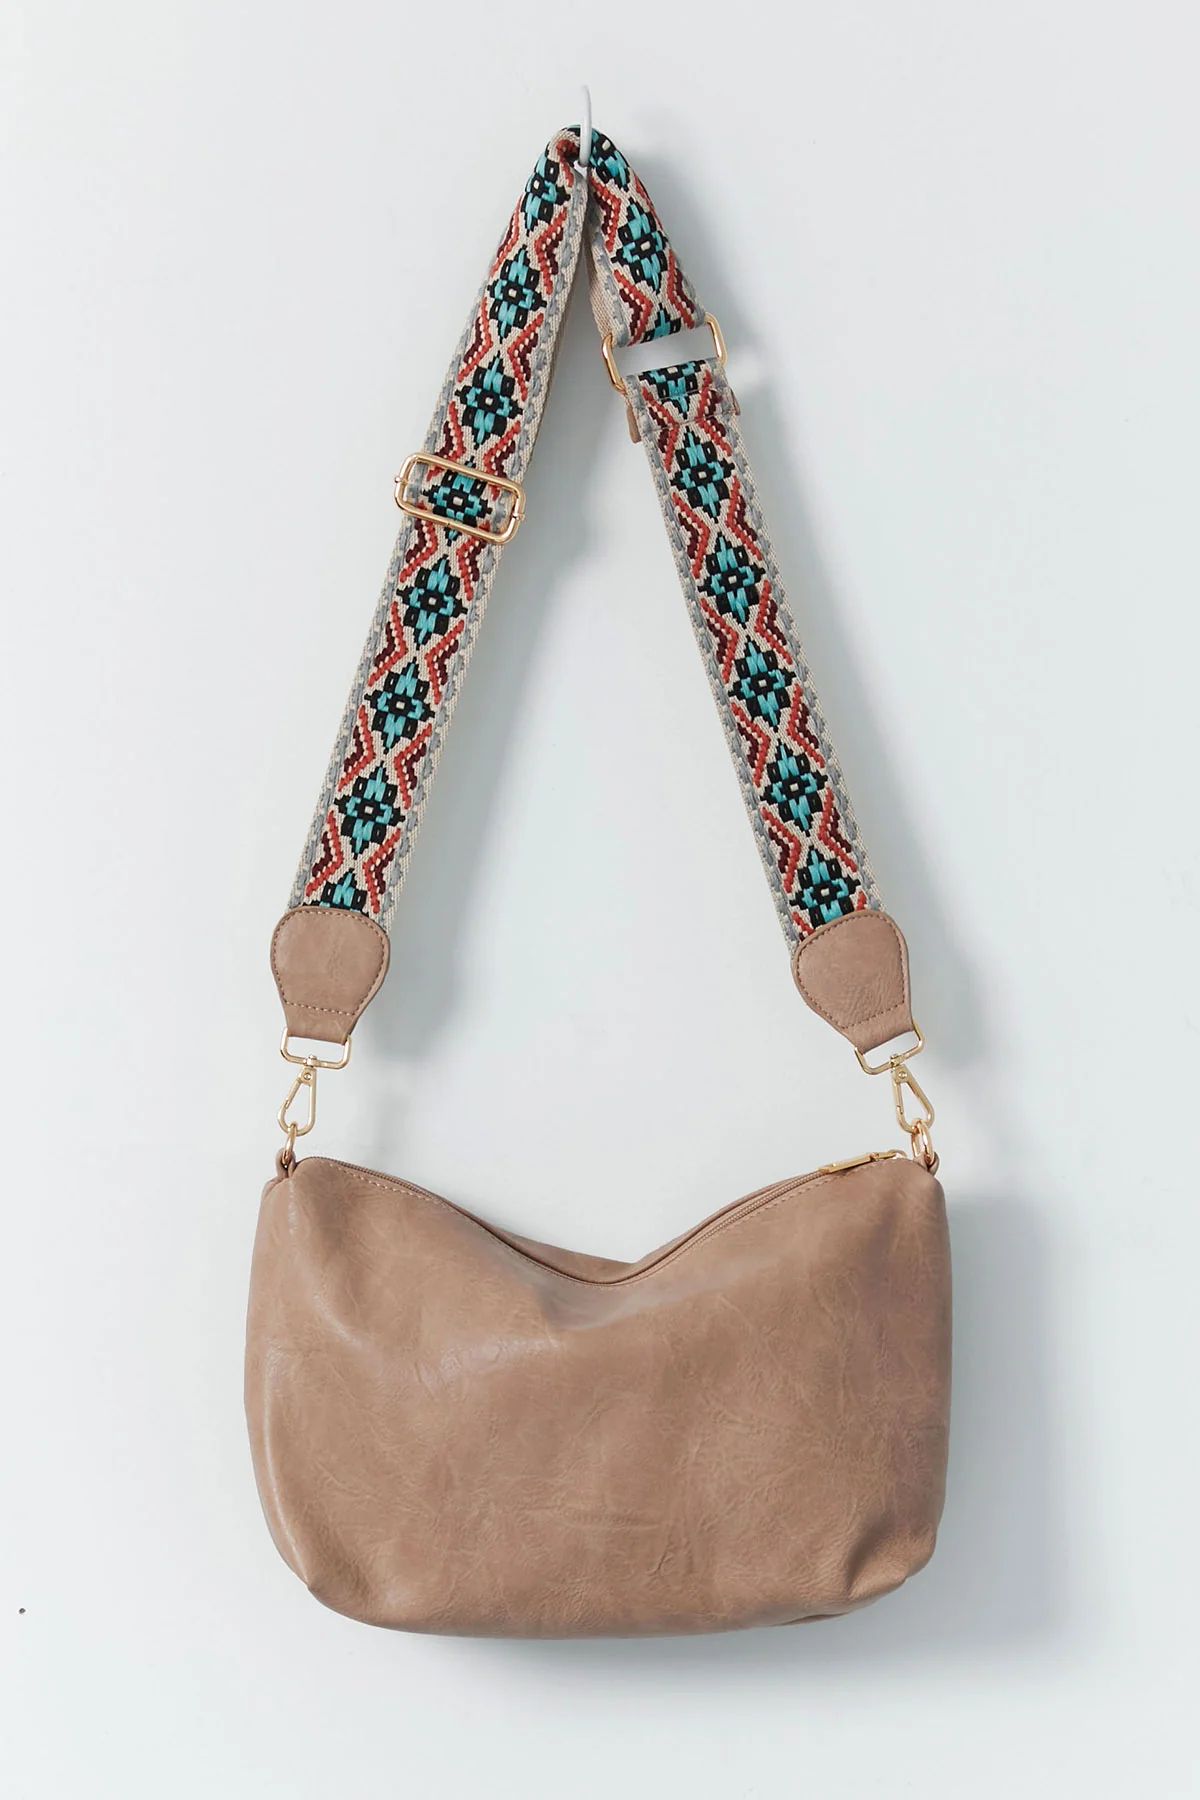 Stone Vegan Pouch Bag + Embroidered Medallion Strap Combo | Social Threads